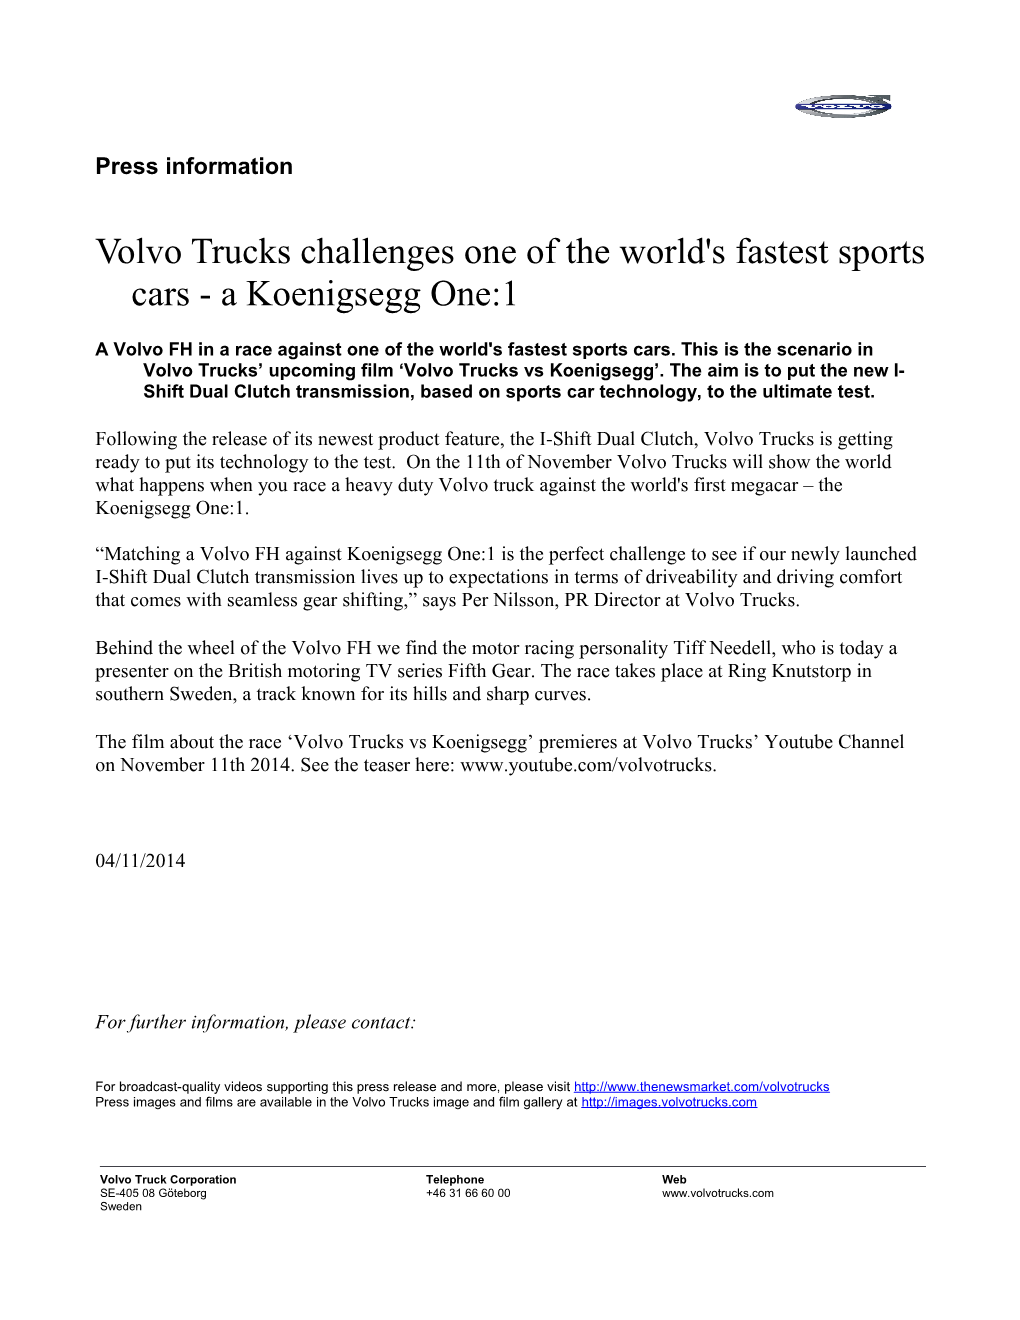 Volvo Trucks Challenges One of the World's Fastest Sports Cars - a Koenigsegg One:1